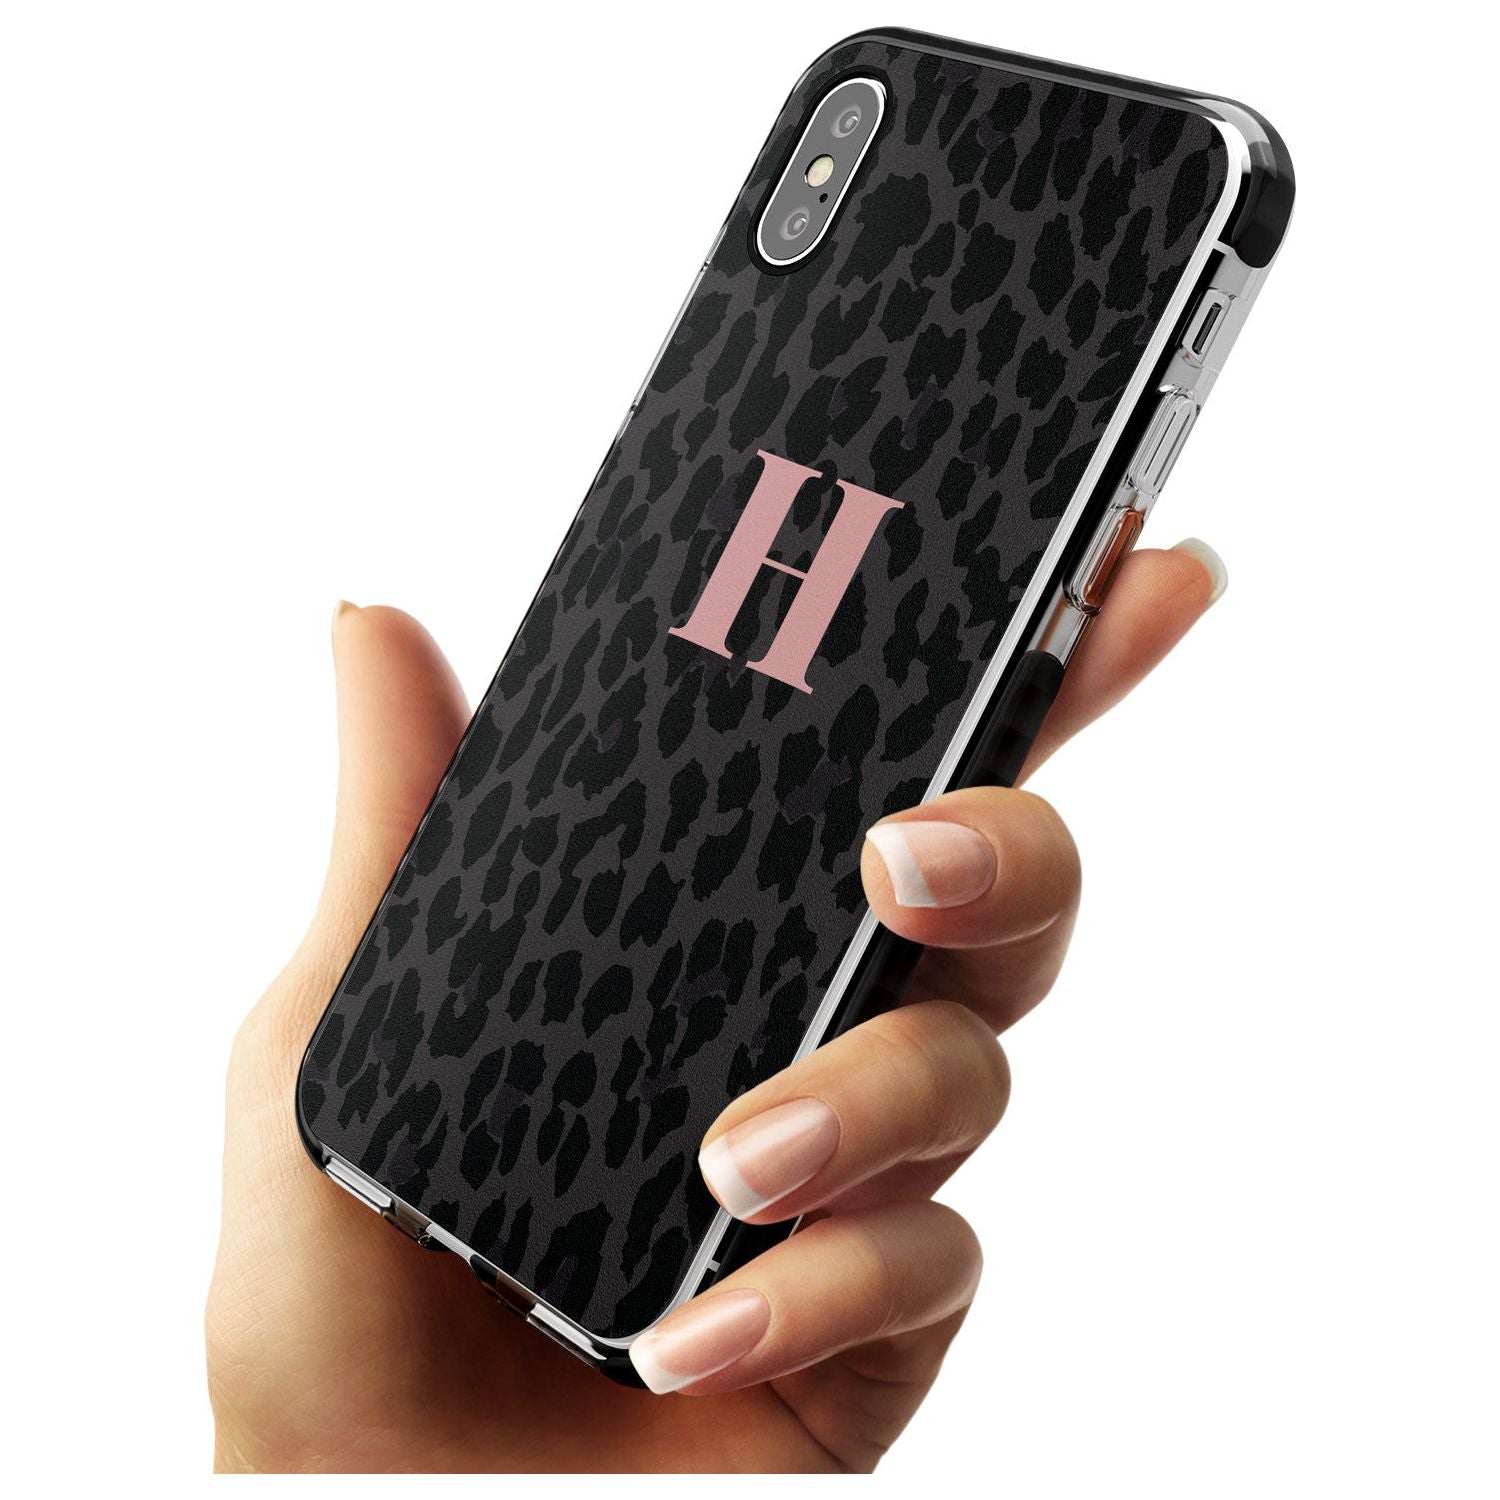 Small Pink Leopard Monogram Black Impact Phone Case for iPhone X XS Max XR